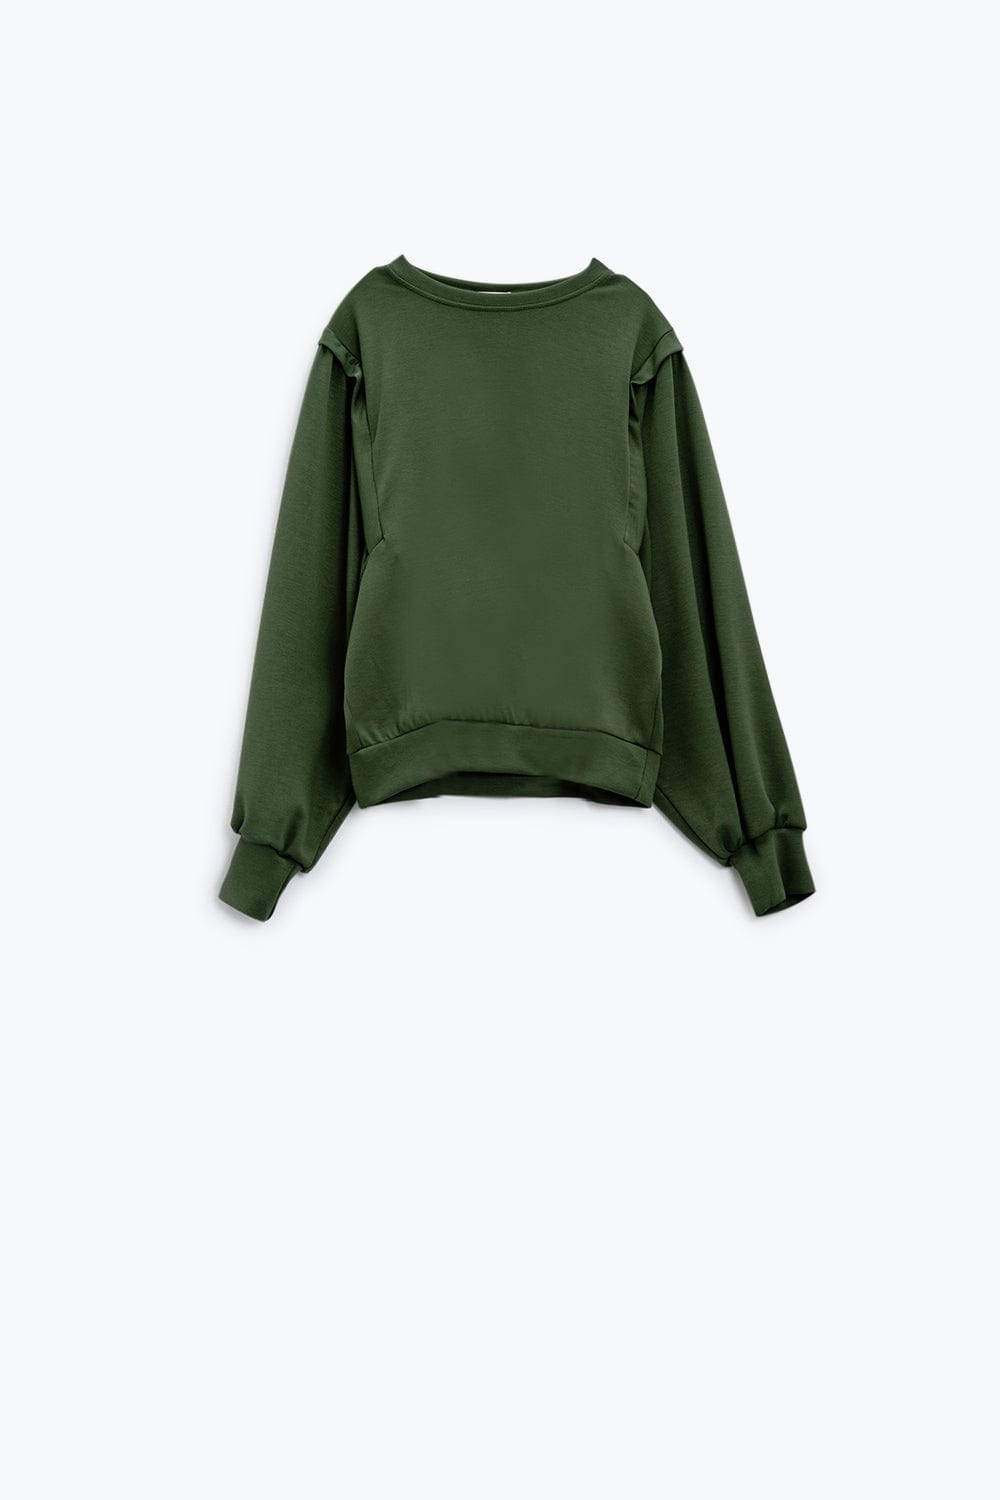 Q2 Sweatshirts One Size / Green Khaki Long-Sleeved Sweatshirts With Frontal Sewn Details On The Sides